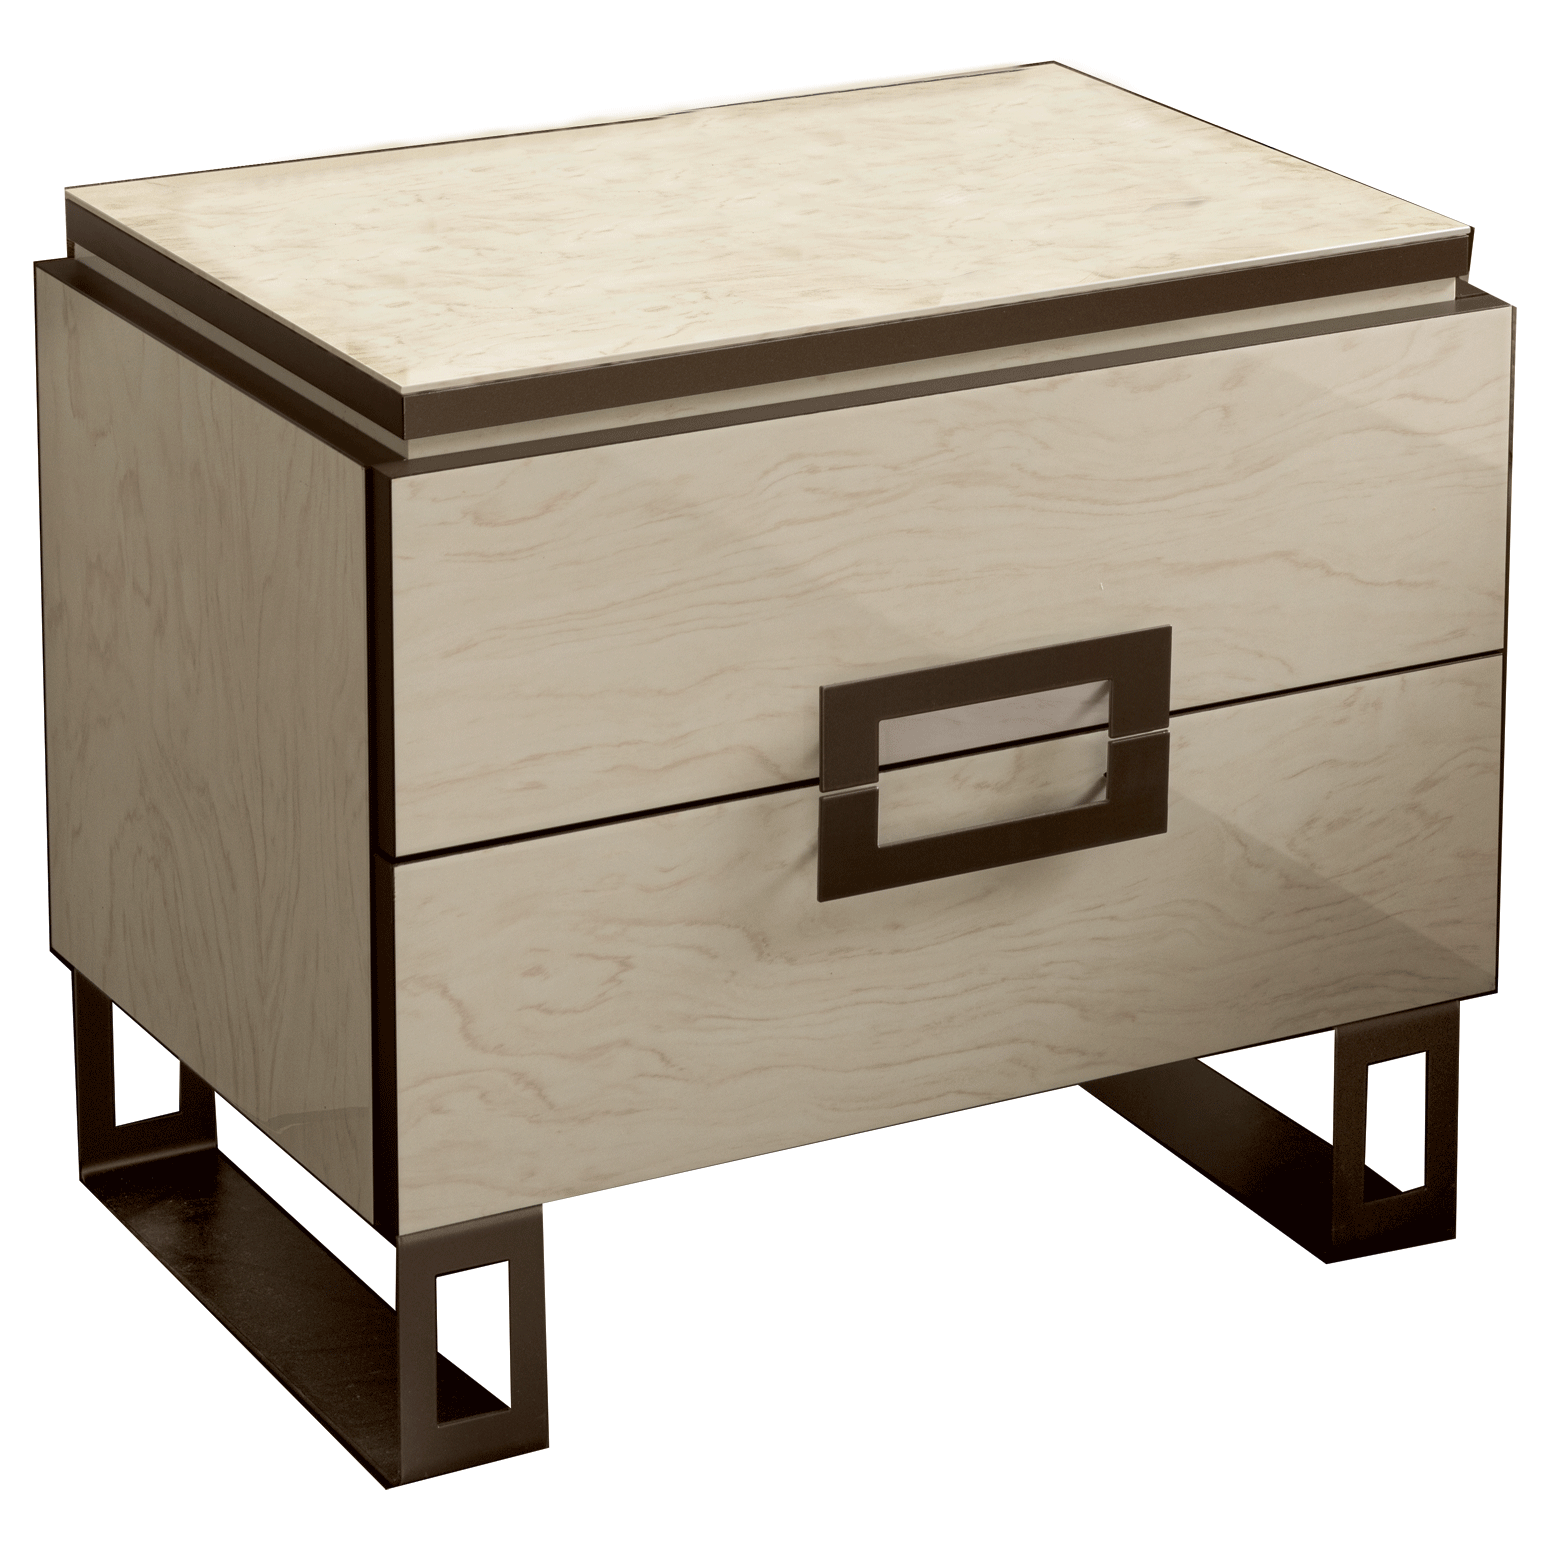 Brands Arredoclassic Dining Room, Italy Poesia Nightstand